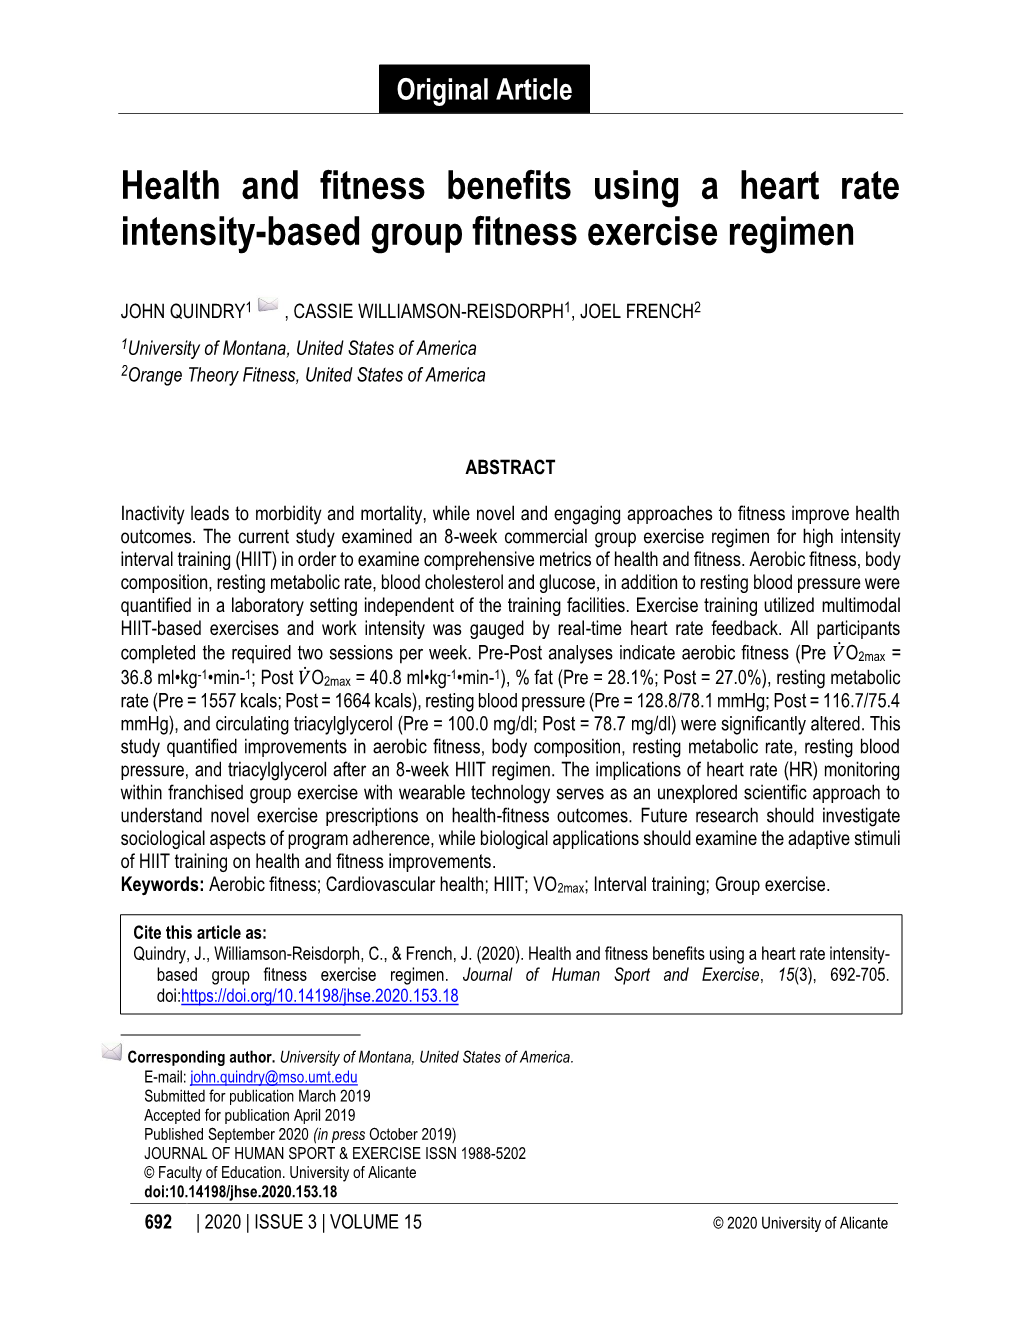 Health and Fitness Benefits Using a Heart Rate Intensity-Based Group Fitness Exercise Regimen